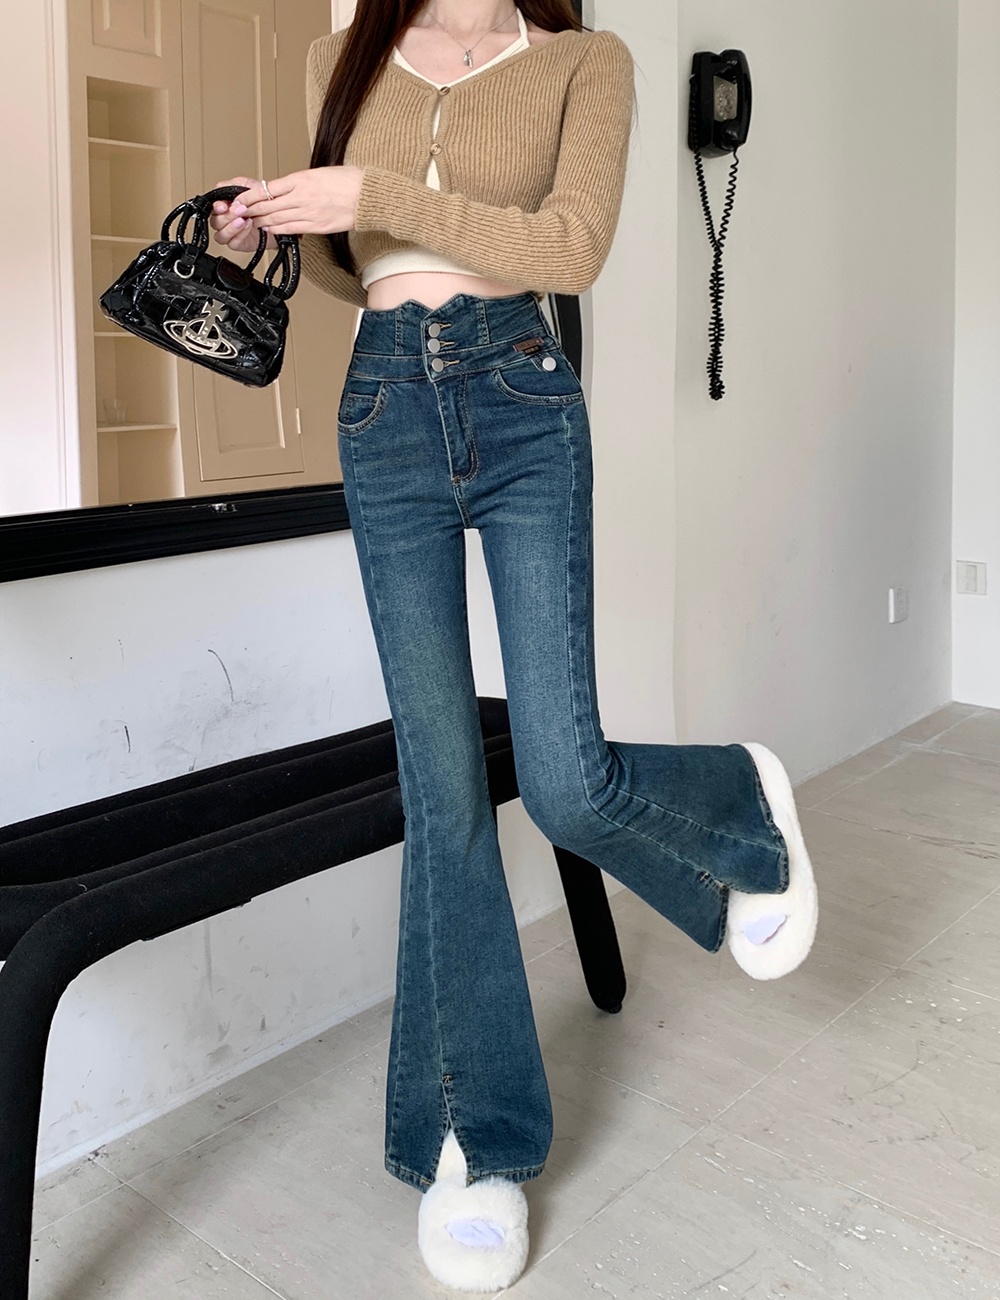 High waist thermal jeans slim thick long pants for women